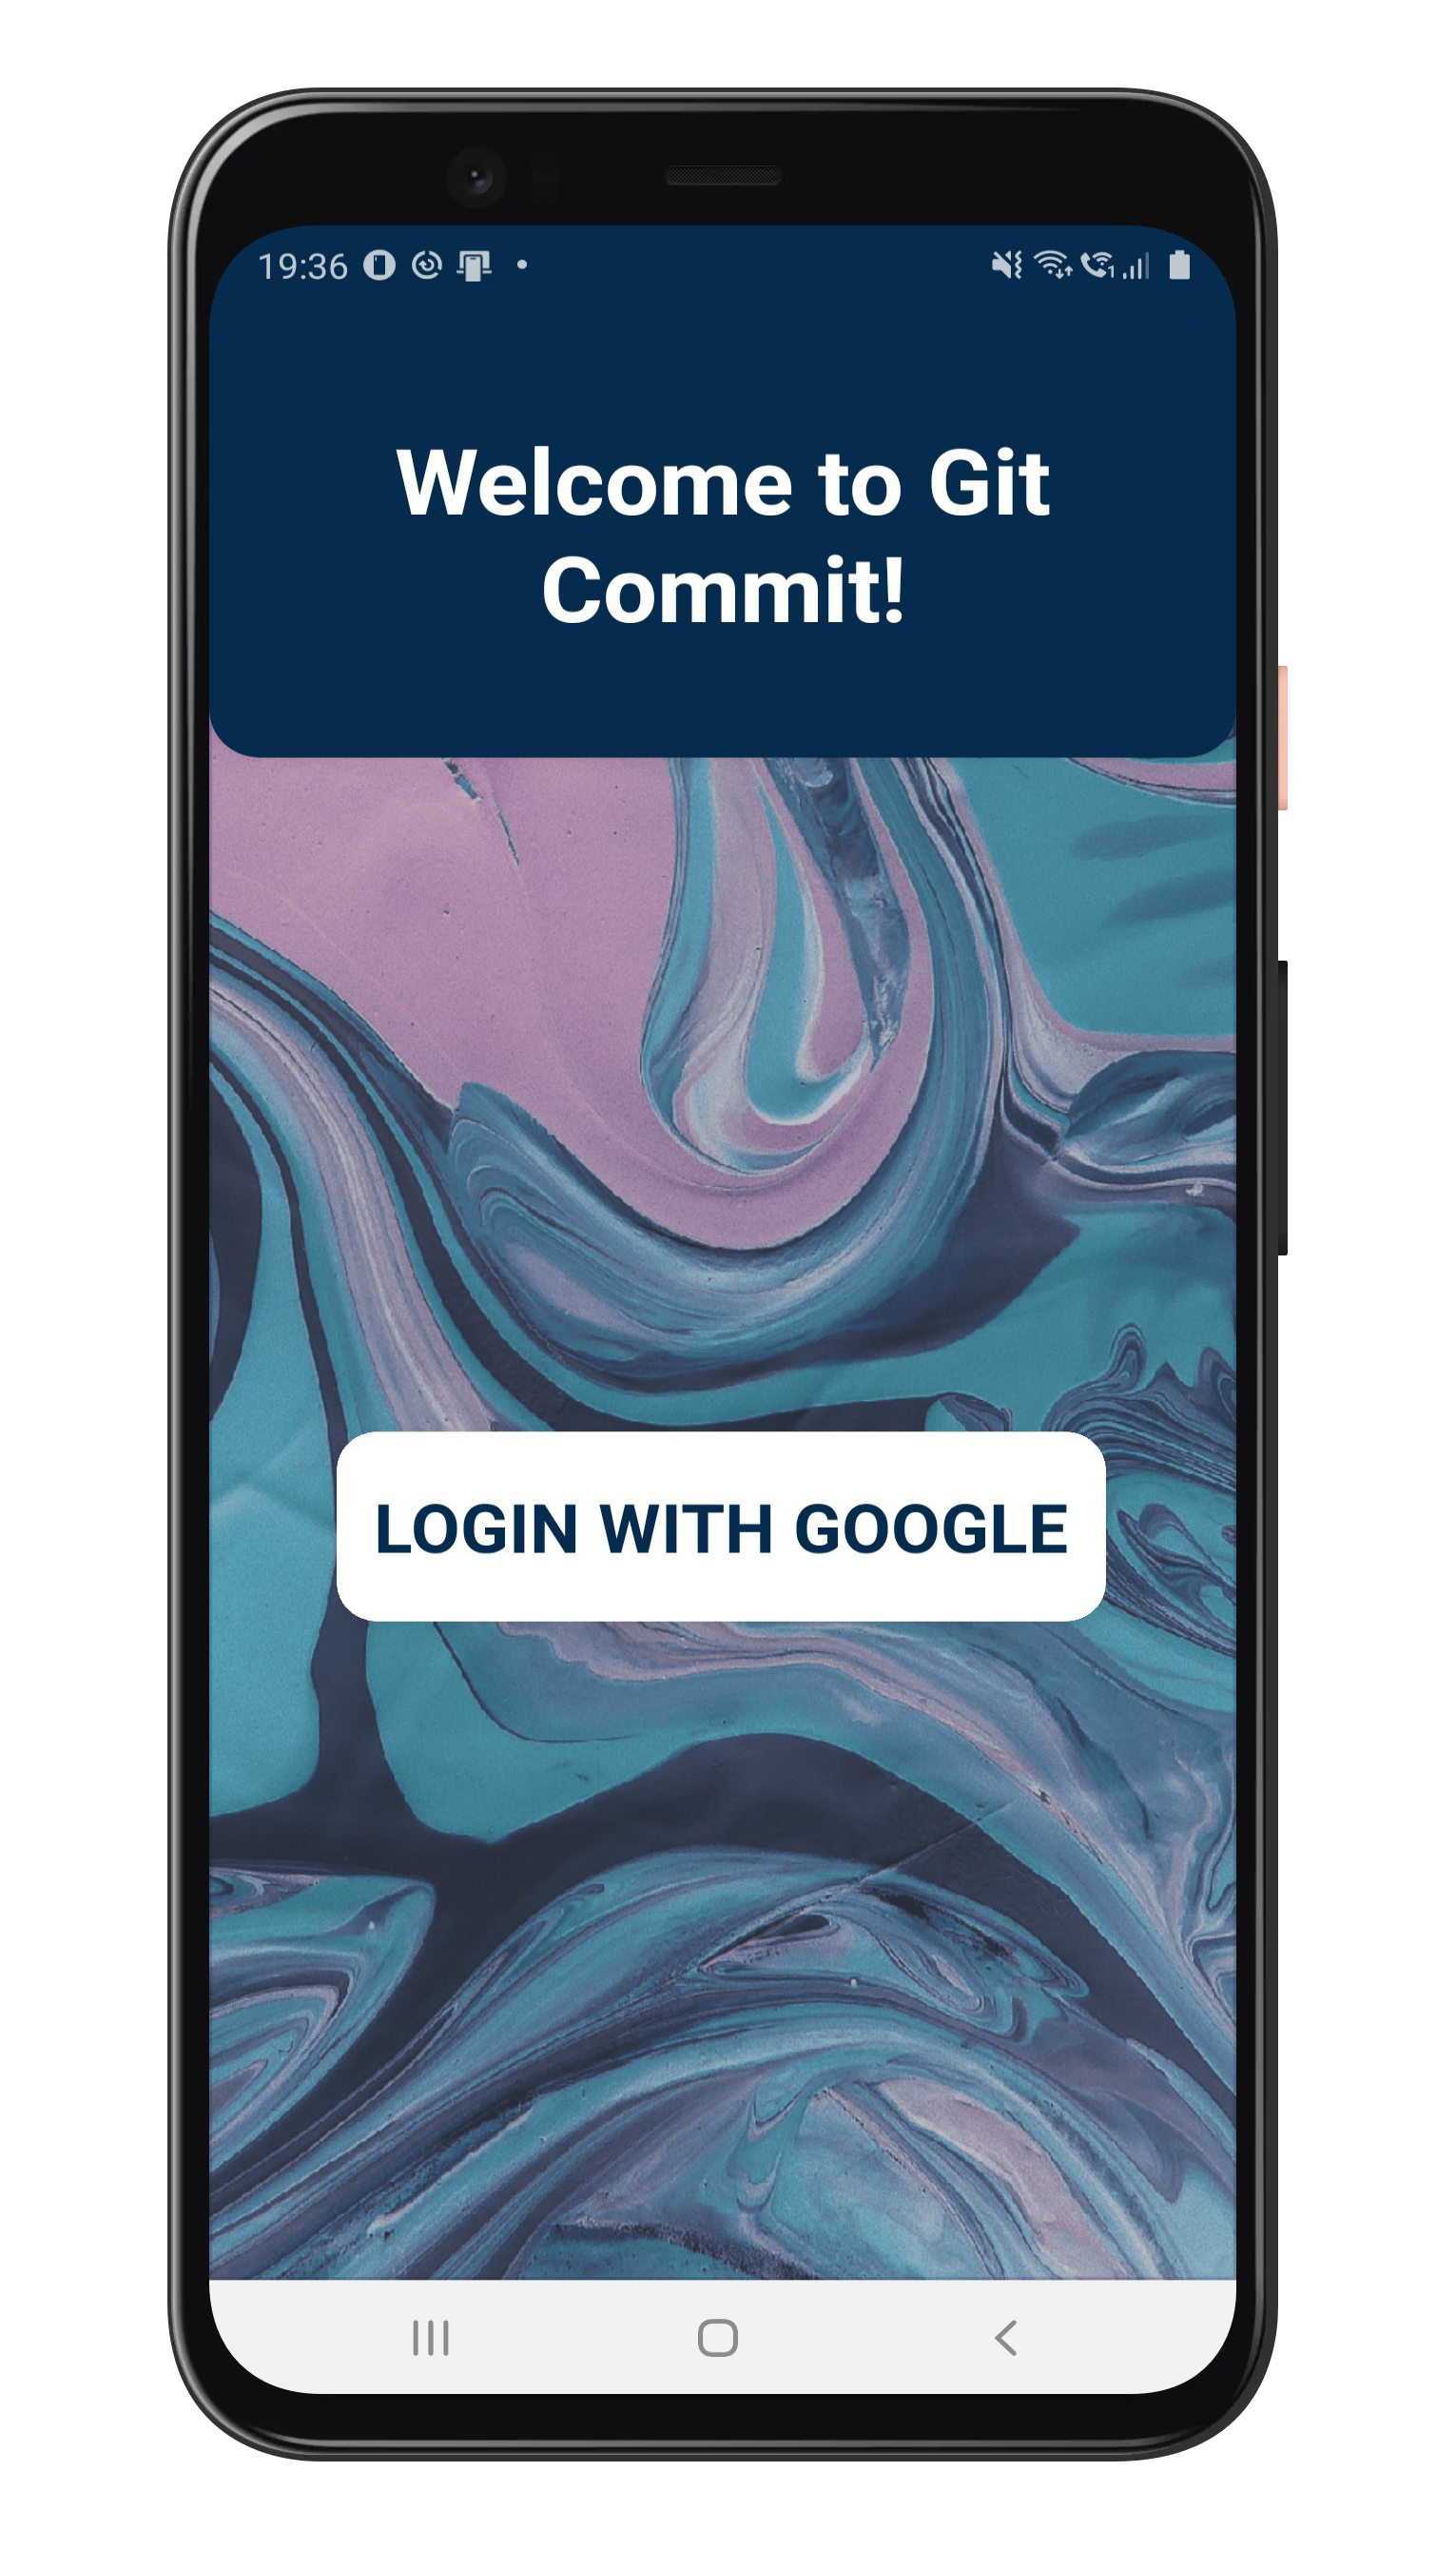 Using SignalR in ASP.NET Core 6 & Xamarin.Forms with Firebase and Google as a Auth provider (Part 2: Android)